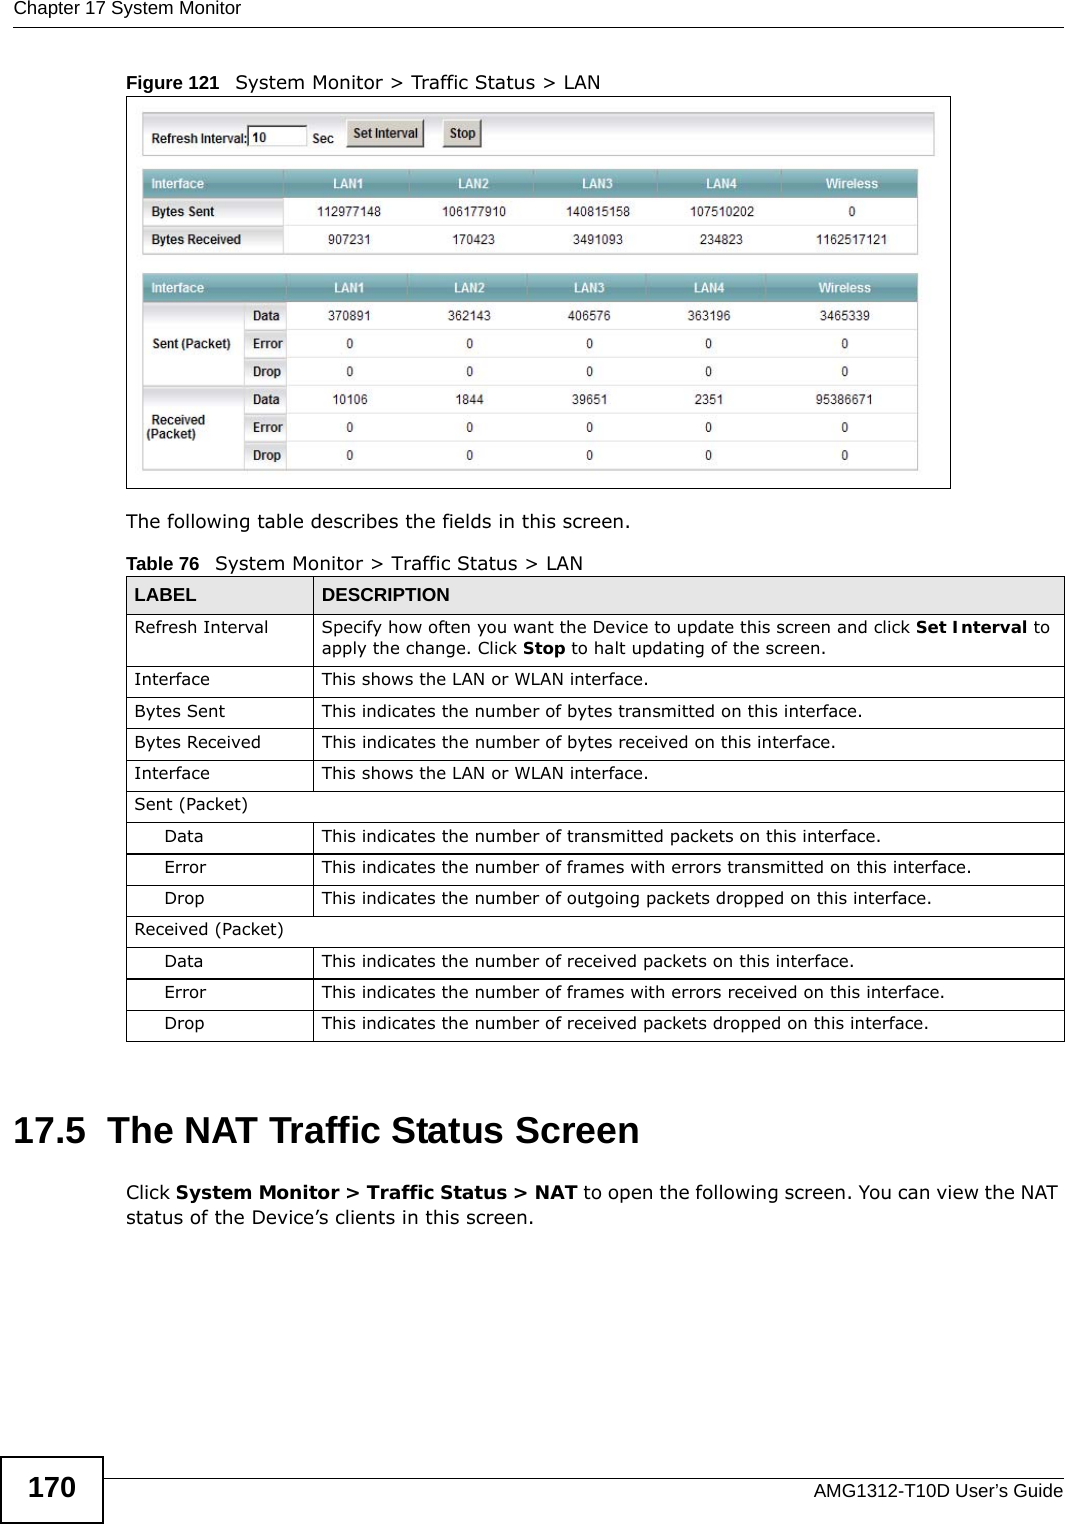 Chapter 17 System MonitorAMG1312-T10D User’s Guide170Figure 121   System Monitor &gt; Traffic Status &gt; LANThe following table describes the fields in this screen.   17.5  The NAT Traffic Status ScreenClick System Monitor &gt; Traffic Status &gt; NAT to open the following screen. You can view the NAT status of the Device’s clients in this screen.Table 76   System Monitor &gt; Traffic Status &gt; LANLABEL DESCRIPTIONRefresh Interval Specify how often you want the Device to update this screen and click Set Interval to apply the change. Click Stop to halt updating of the screen.Interface This shows the LAN or WLAN interface. Bytes Sent This indicates the number of bytes transmitted on this interface.Bytes Received This indicates the number of bytes received on this interface.Interface This shows the LAN or WLAN interface. Sent (Packet)  Data  This indicates the number of transmitted packets on this interface.Error This indicates the number of frames with errors transmitted on this interface.Drop This indicates the number of outgoing packets dropped on this interface.Received (Packet) Data  This indicates the number of received packets on this interface.Error This indicates the number of frames with errors received on this interface.Drop This indicates the number of received packets dropped on this interface.